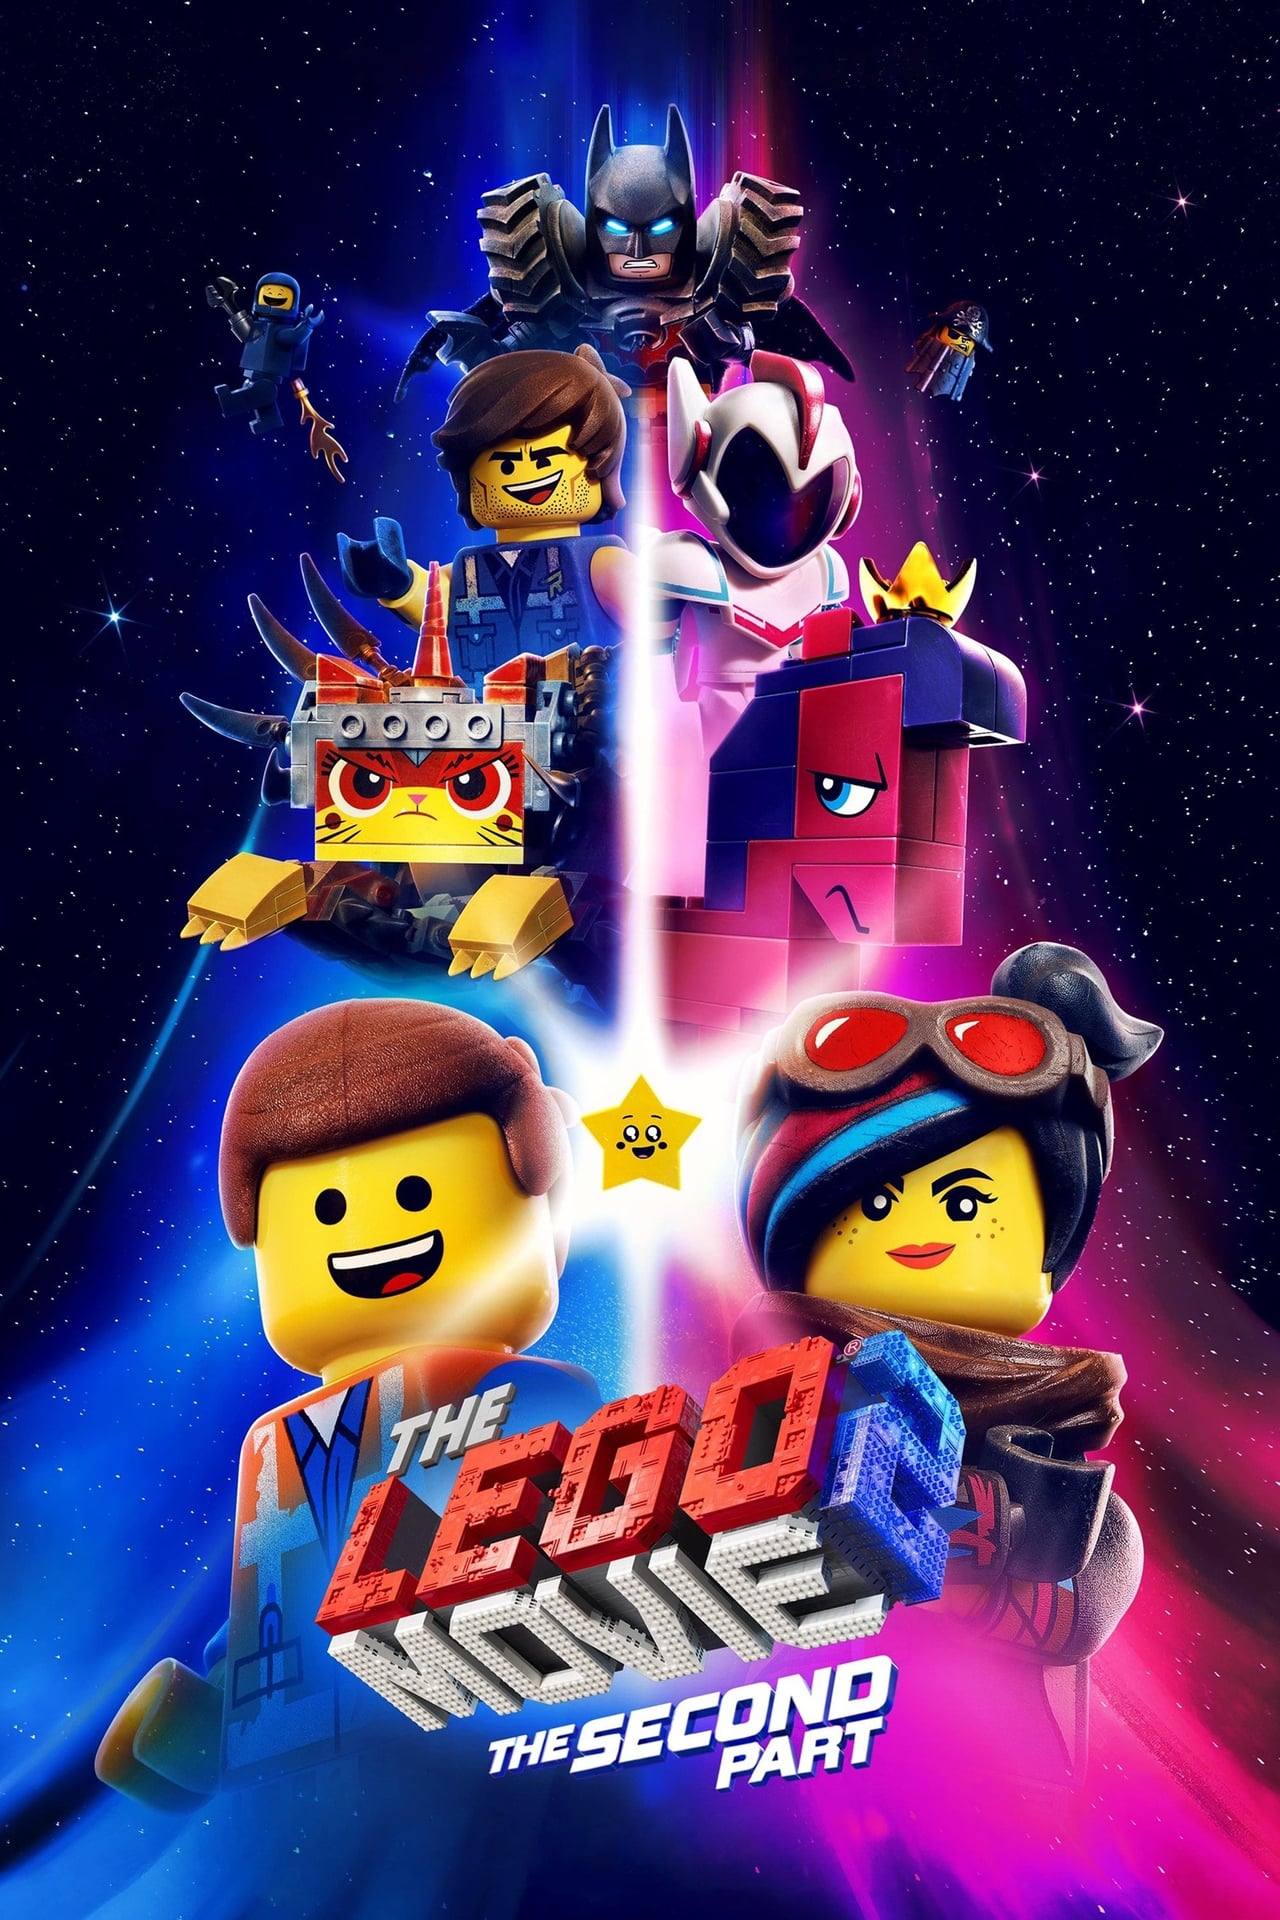 The Lego Movie 2: The Second Part (2019) 128Kbps 23.976Fps 48Khz 2.0Ch DD+ NF E-AC3 Turkish Audio TAC